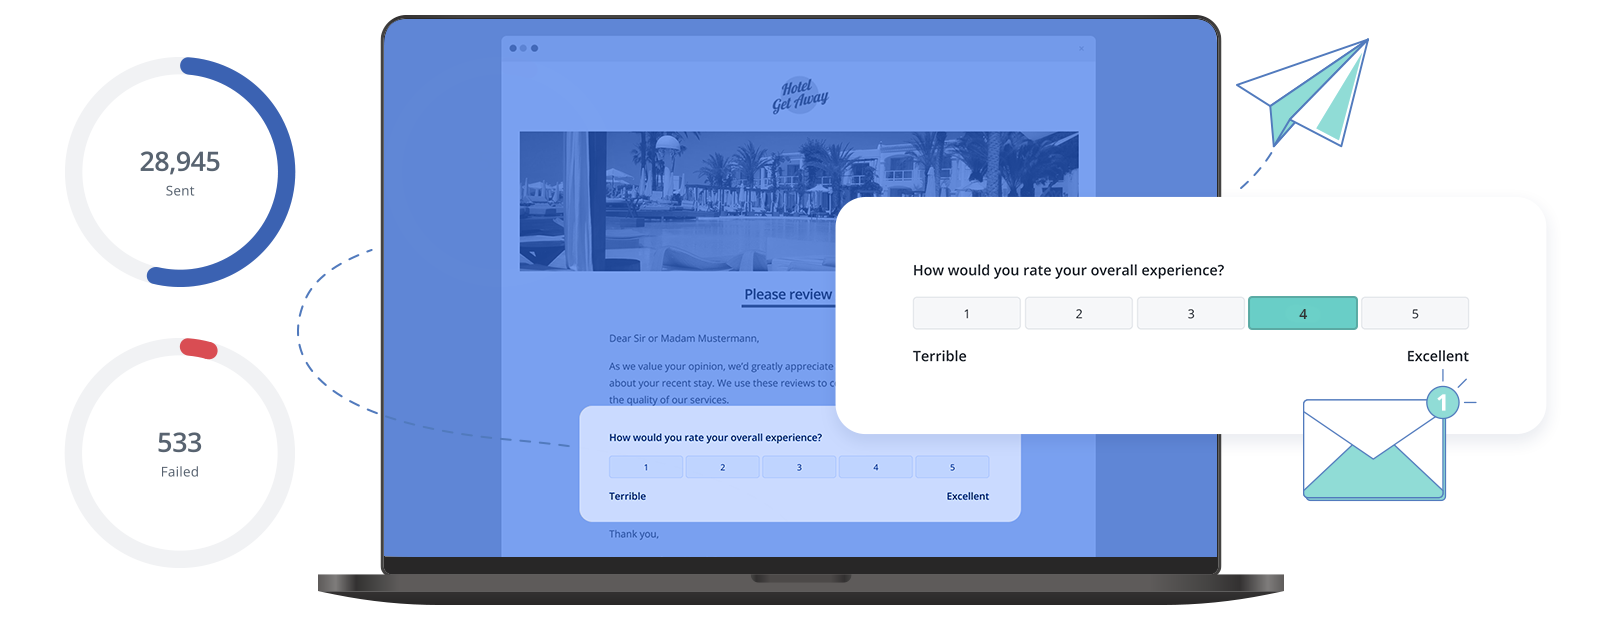 Capture feedback - Get set up once, get customer insights forever. Deliver engaging surveys on autopilot and capture feedback across every touchpoint. Connect insights from your customer’s digital and on-site experience